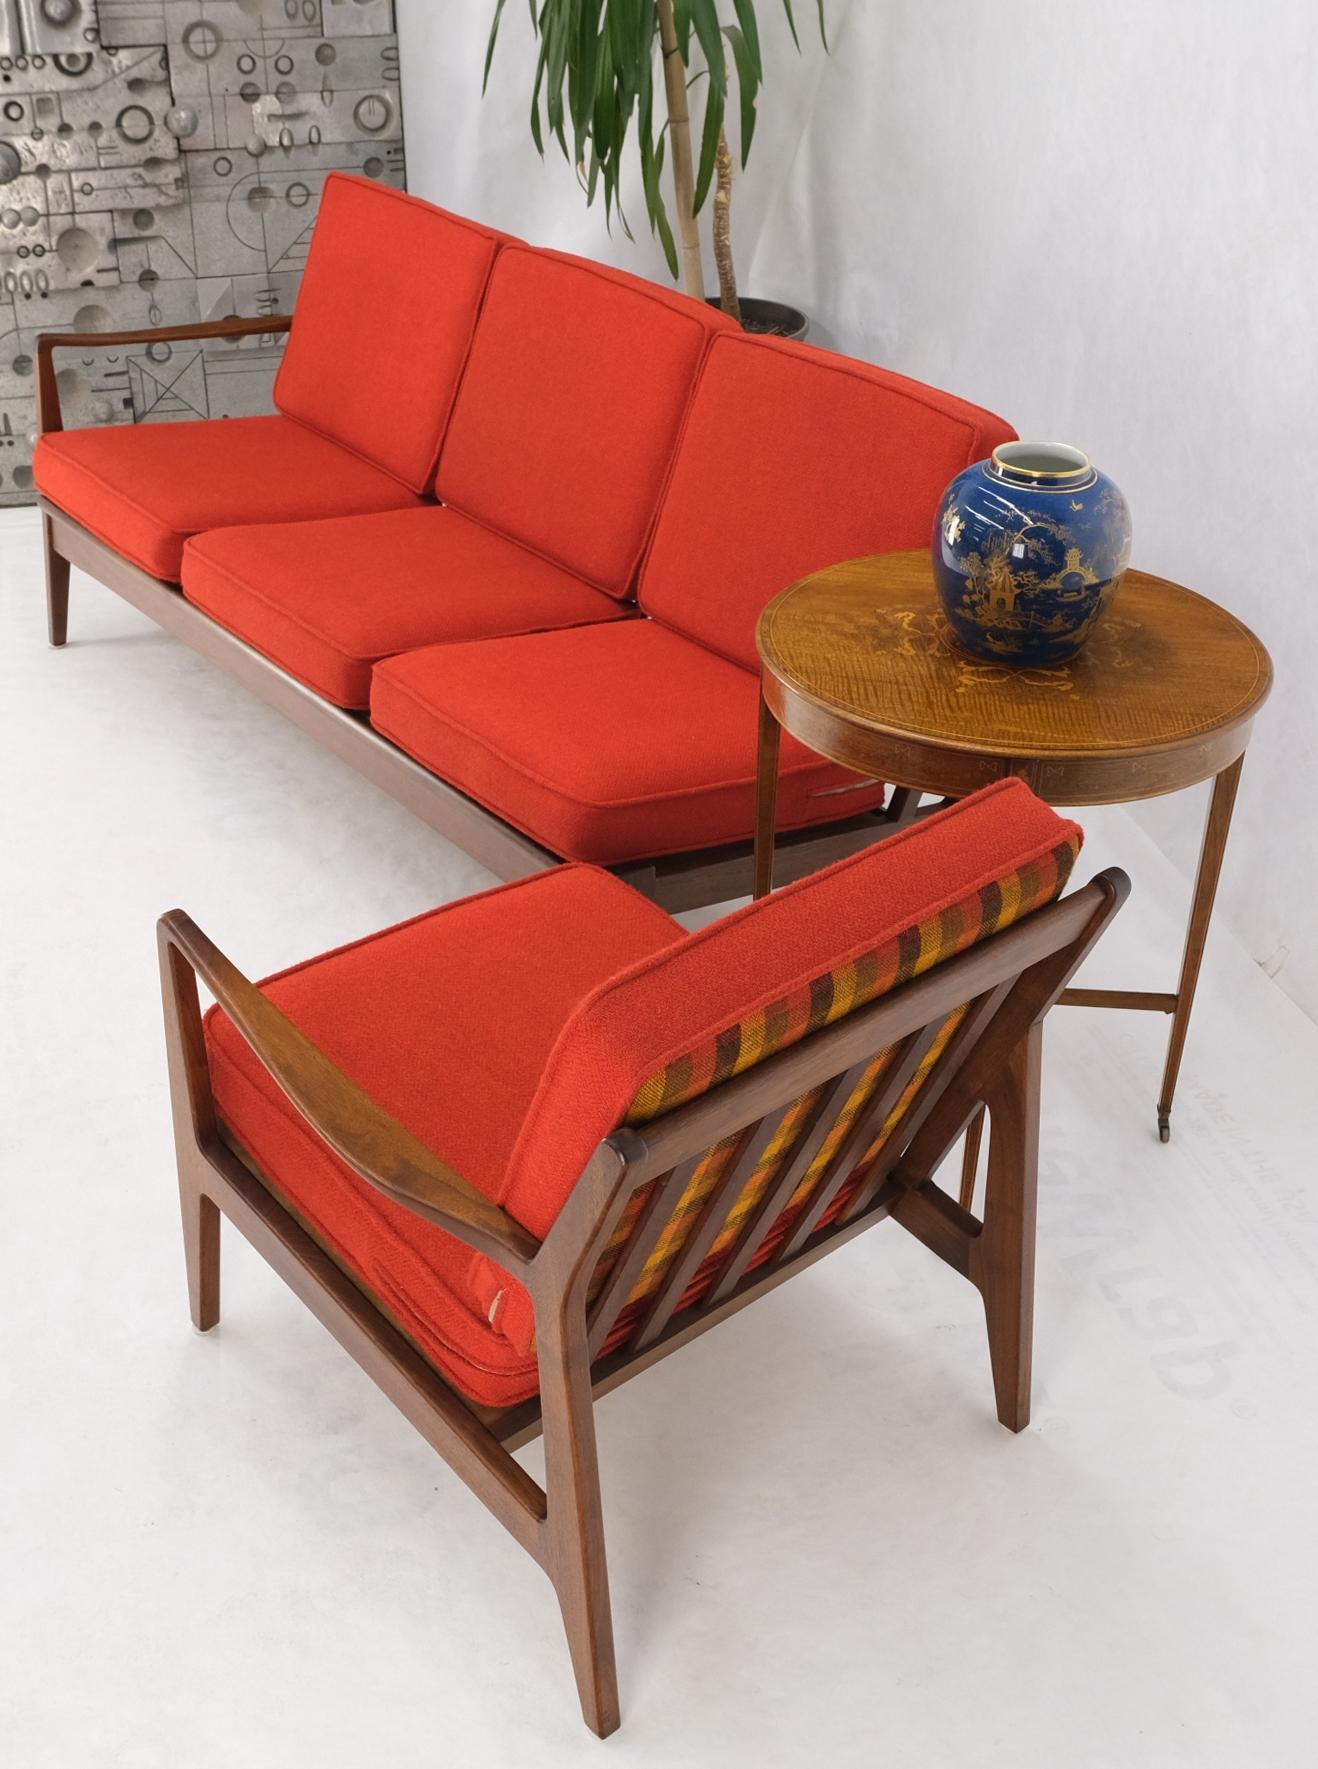 Danish Mid-Century Modern walnut lounge chair settee loveseat couch sofa 4 seats set.
SetListing dimensions reflect combined length.

Long seat measures 29'' x 68'' × 28'' Seat height: 17''
Single seat measures 29'' x 24'' x 28'' Seat height: